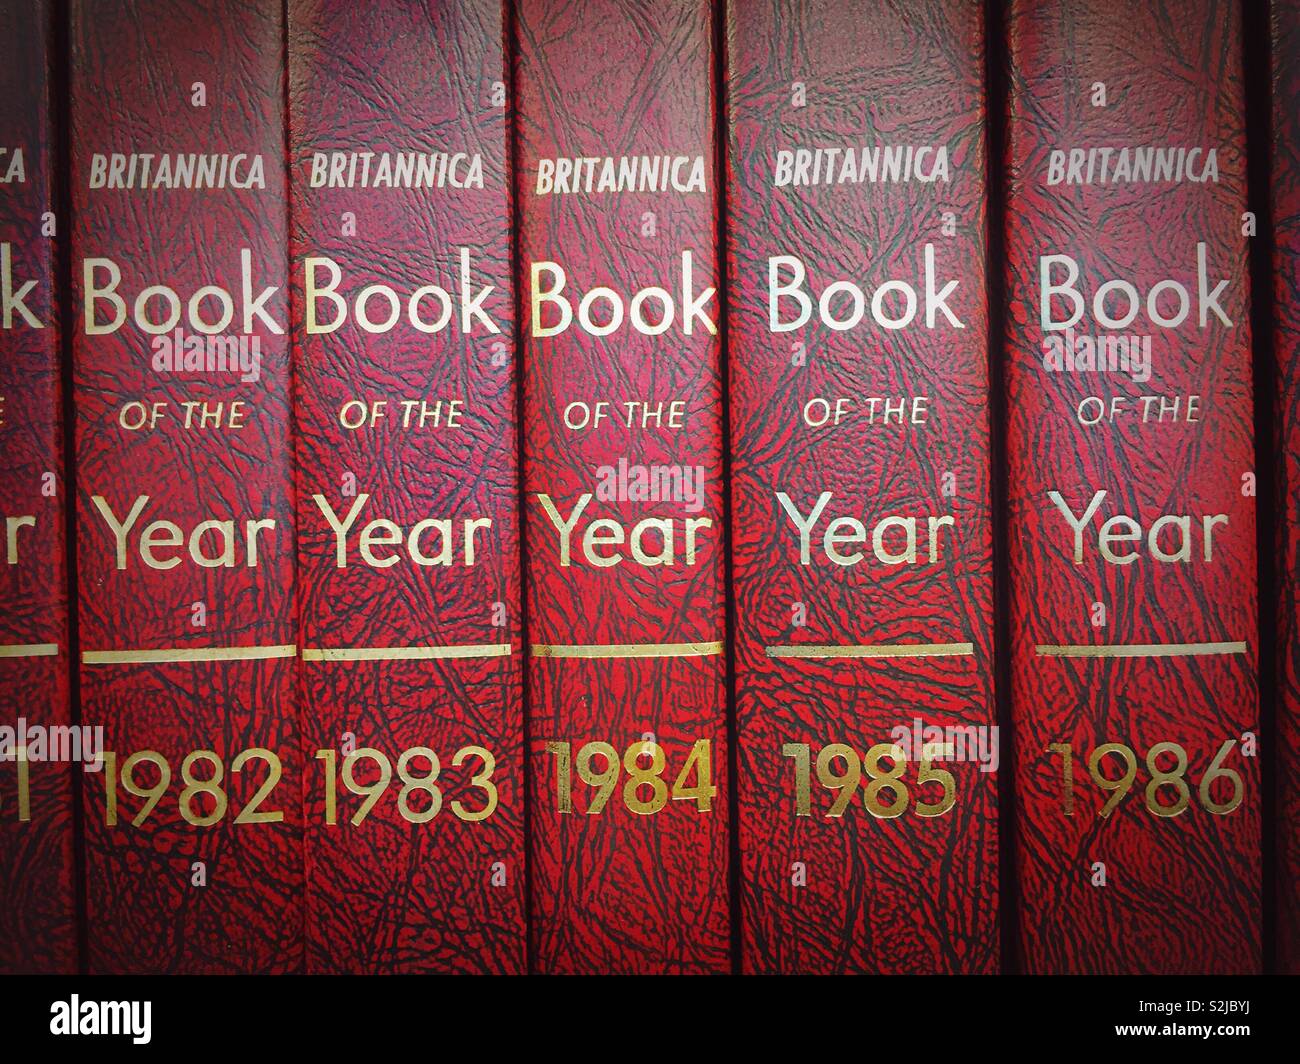 Encyclopedia Britannica book of the year 19 82–86 in the New York City public library, United States Stock Photo